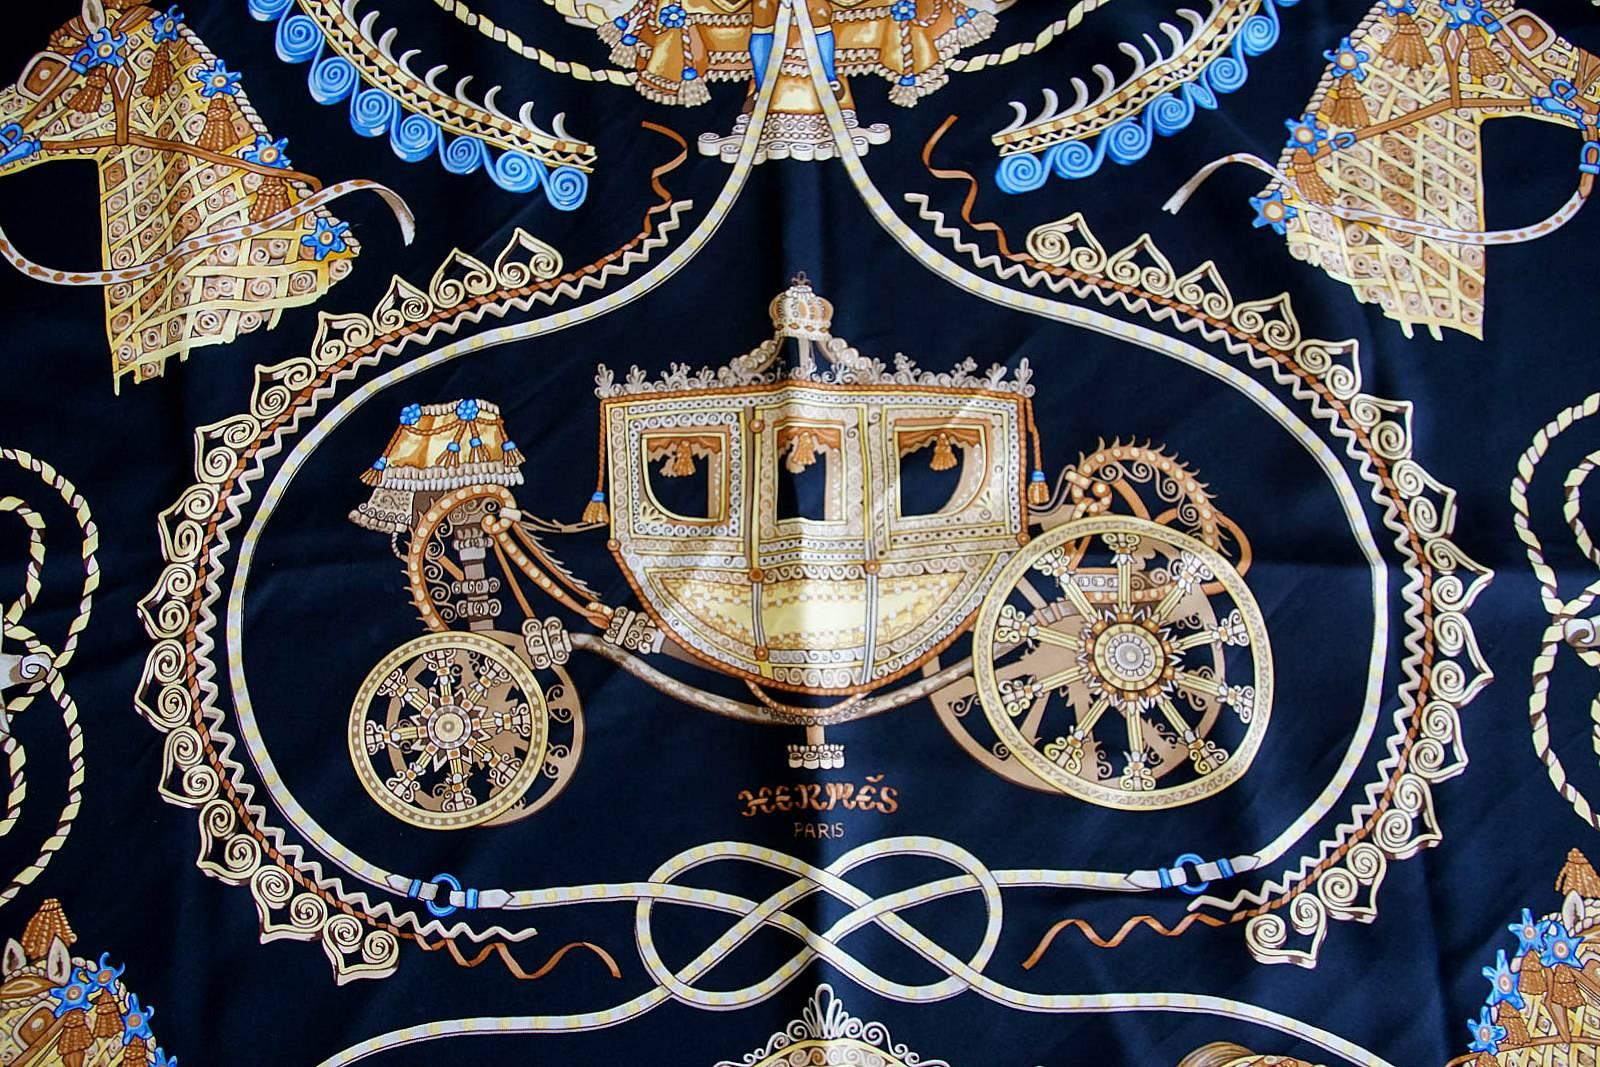 Guaranteed authentic HERMES silk scarf with equestrian motif.
Beautiful vintage silk scarf titled 